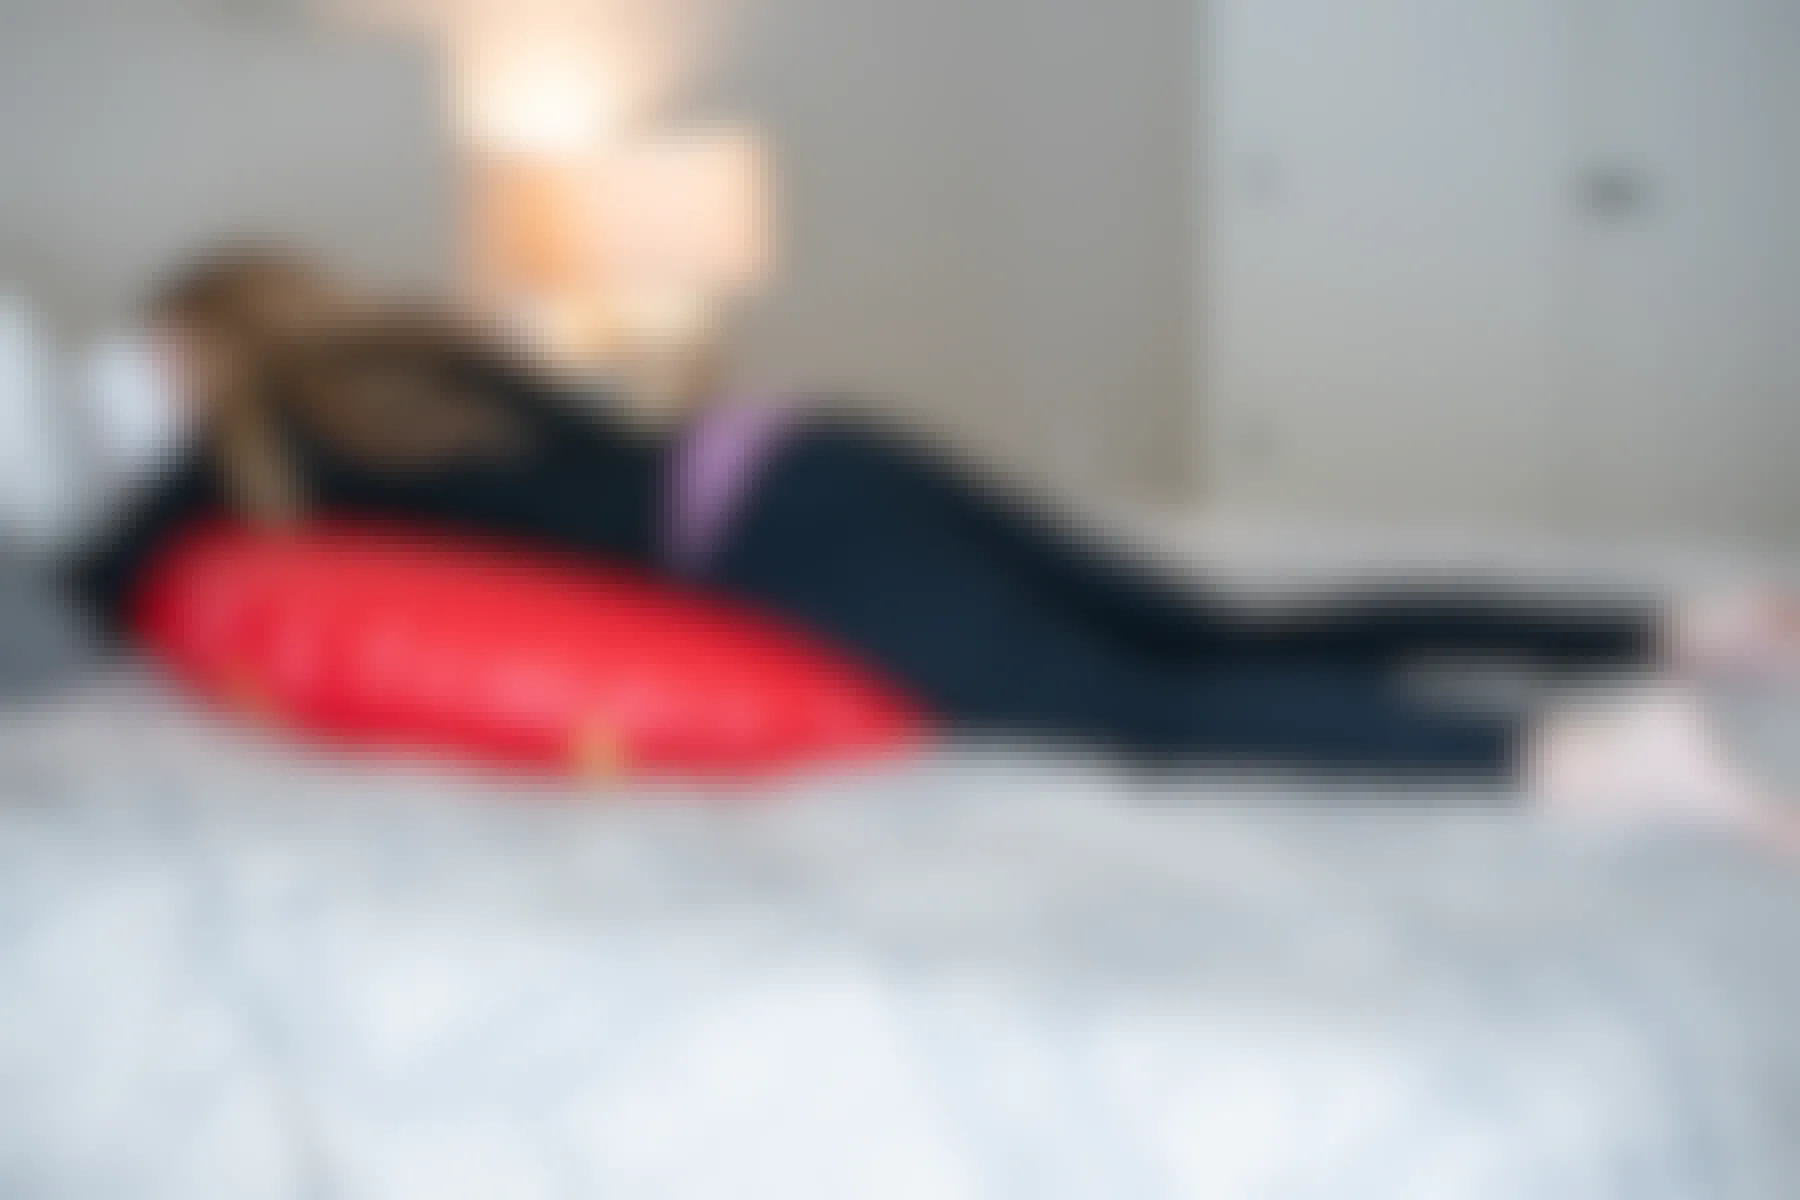 A woman laying down on a inner tube on a bed.